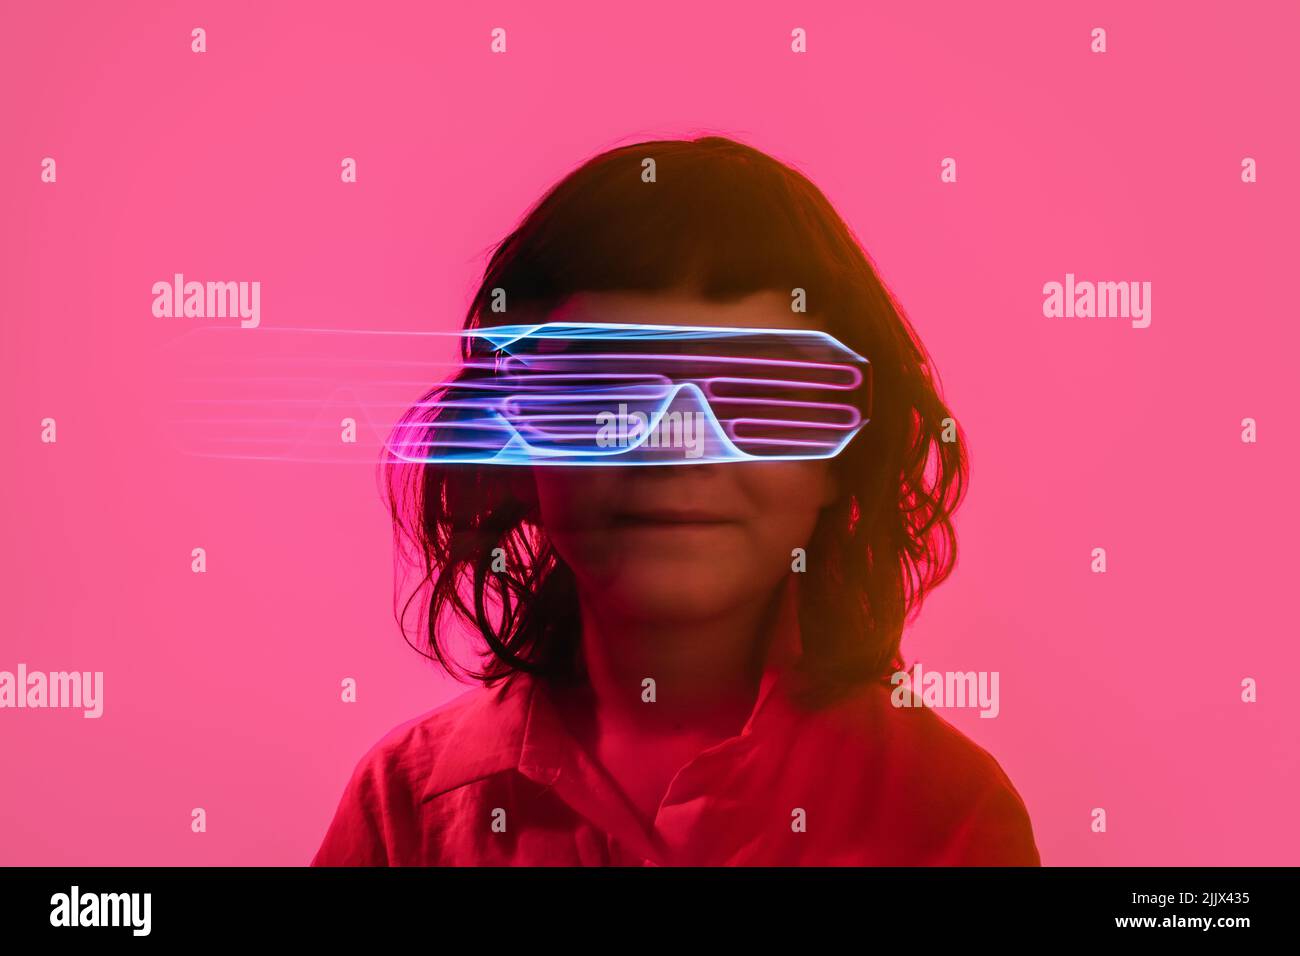 Adorable little child in futuristic neon goggles during party against bright pink background Stock Photo